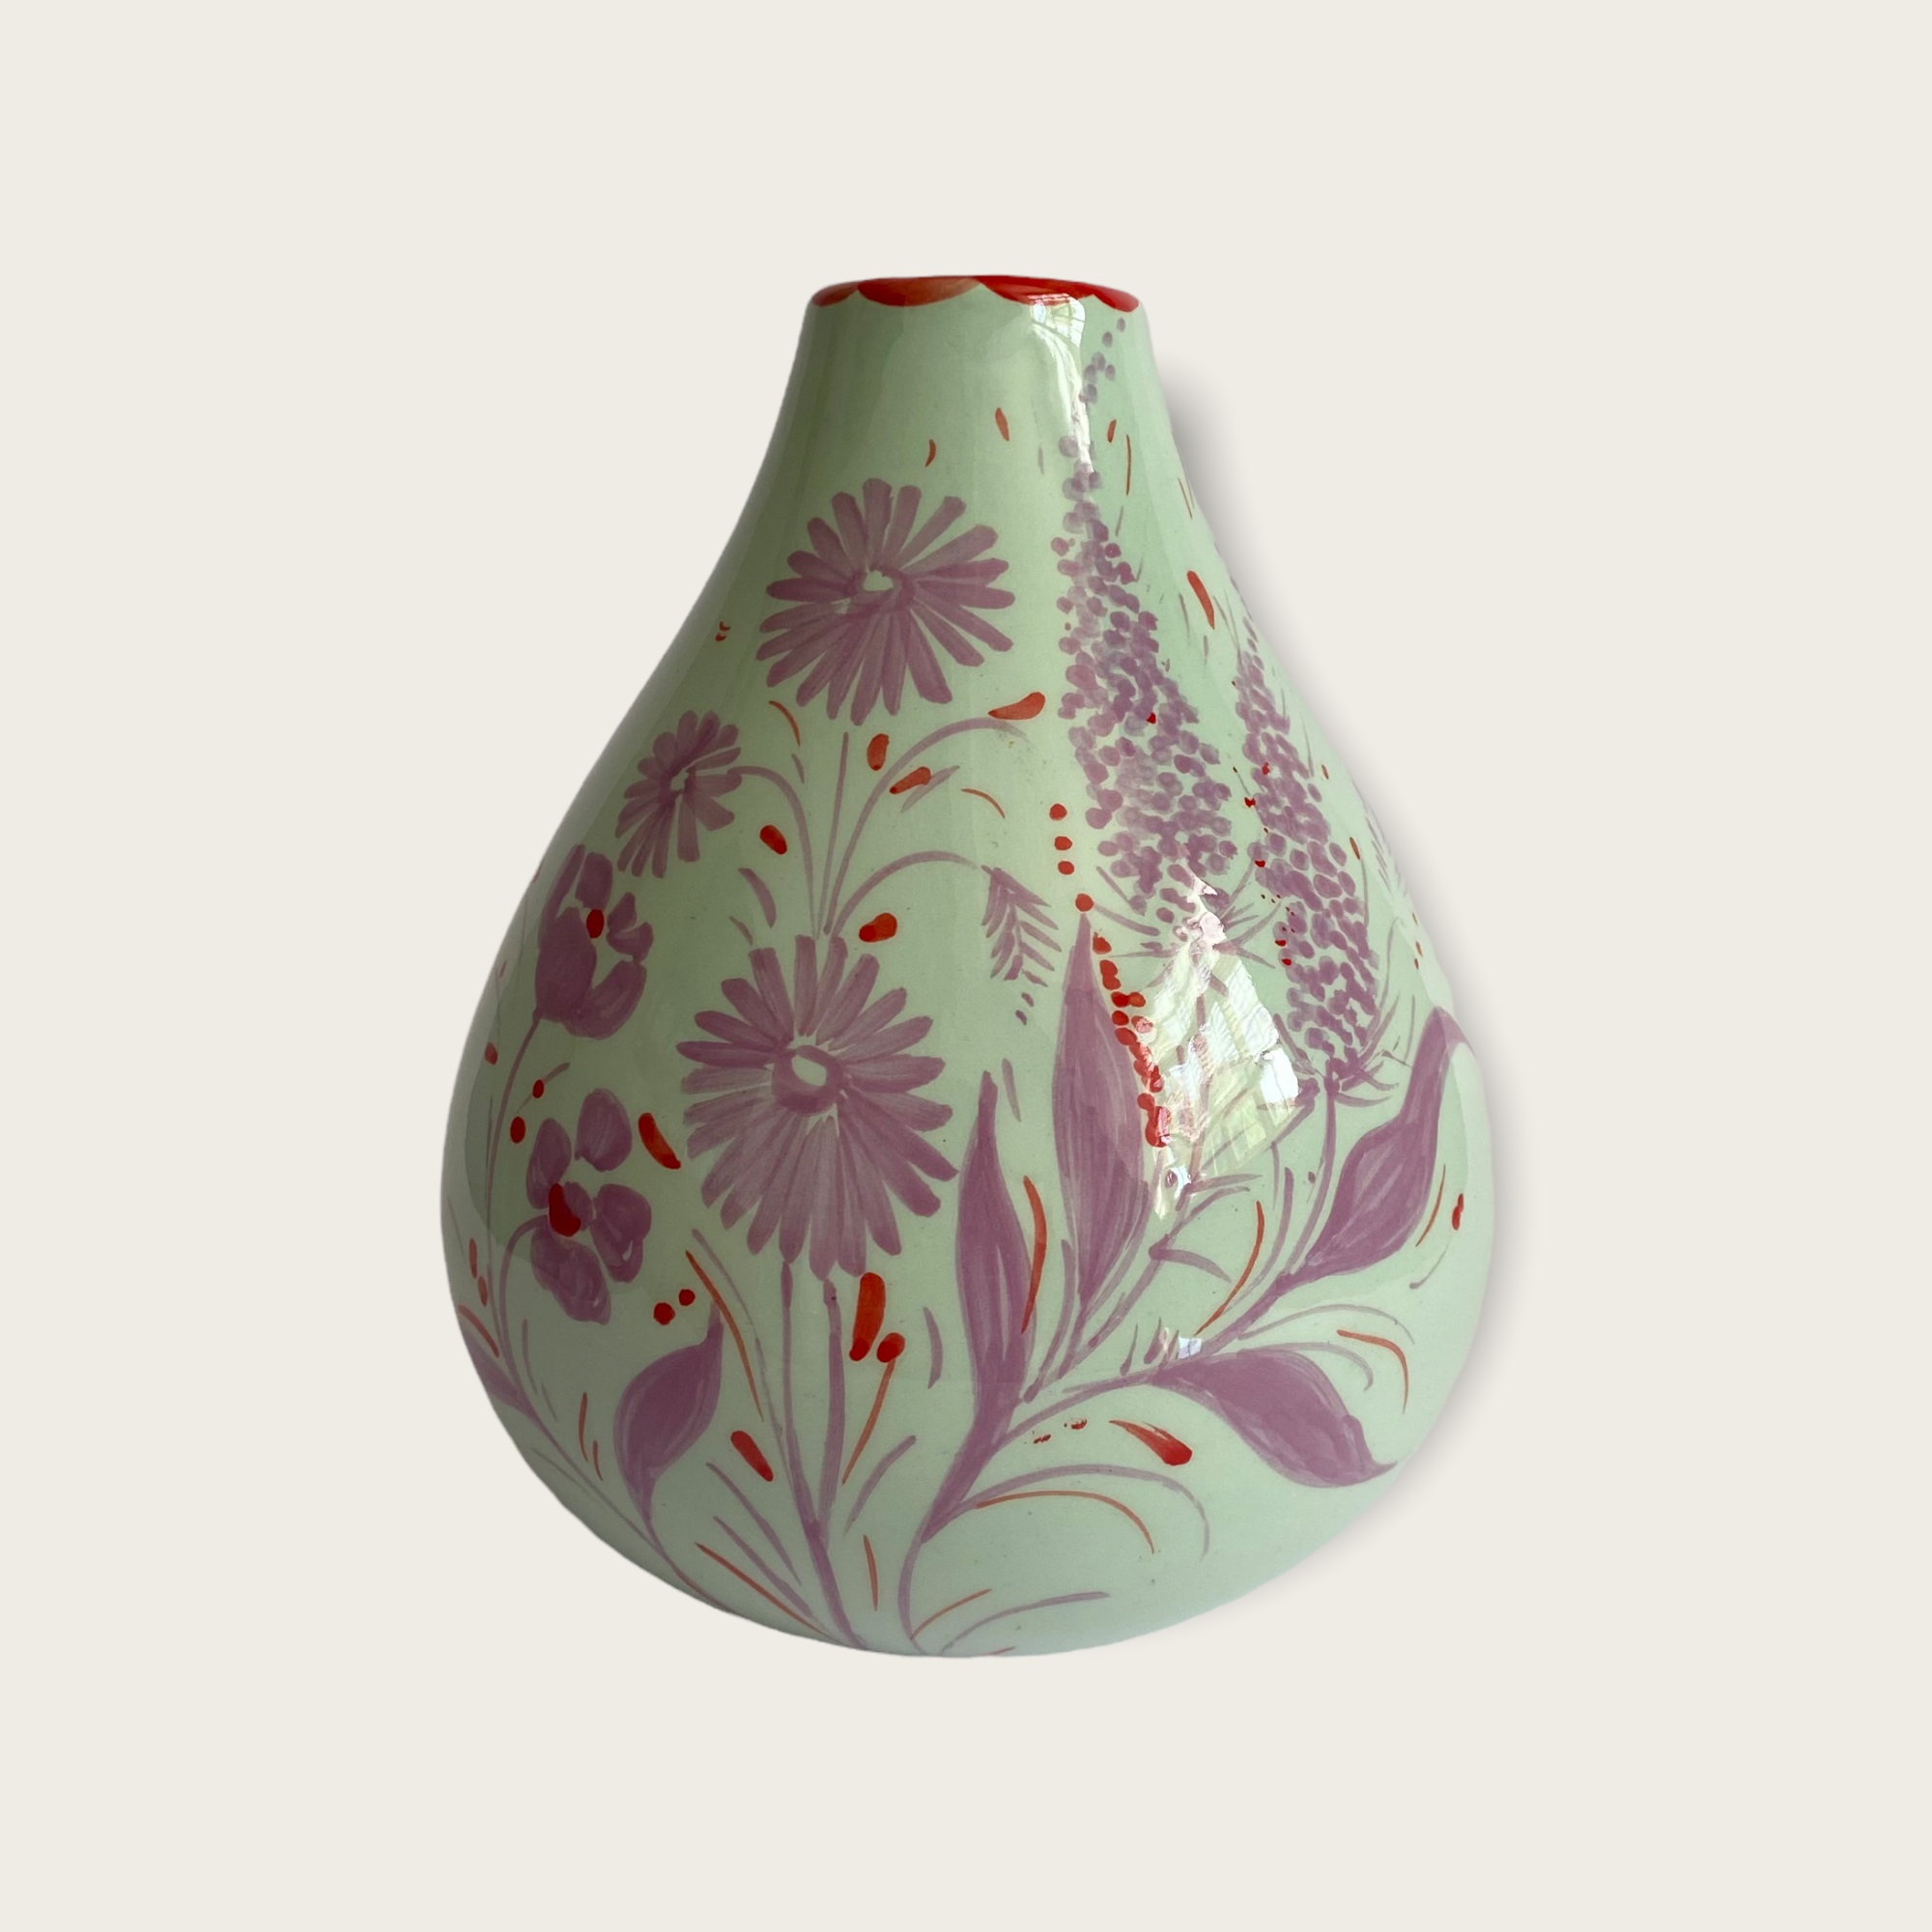 A mint green coloured vase in a bulb shape with handpainted florals in lilac with touches of red. 